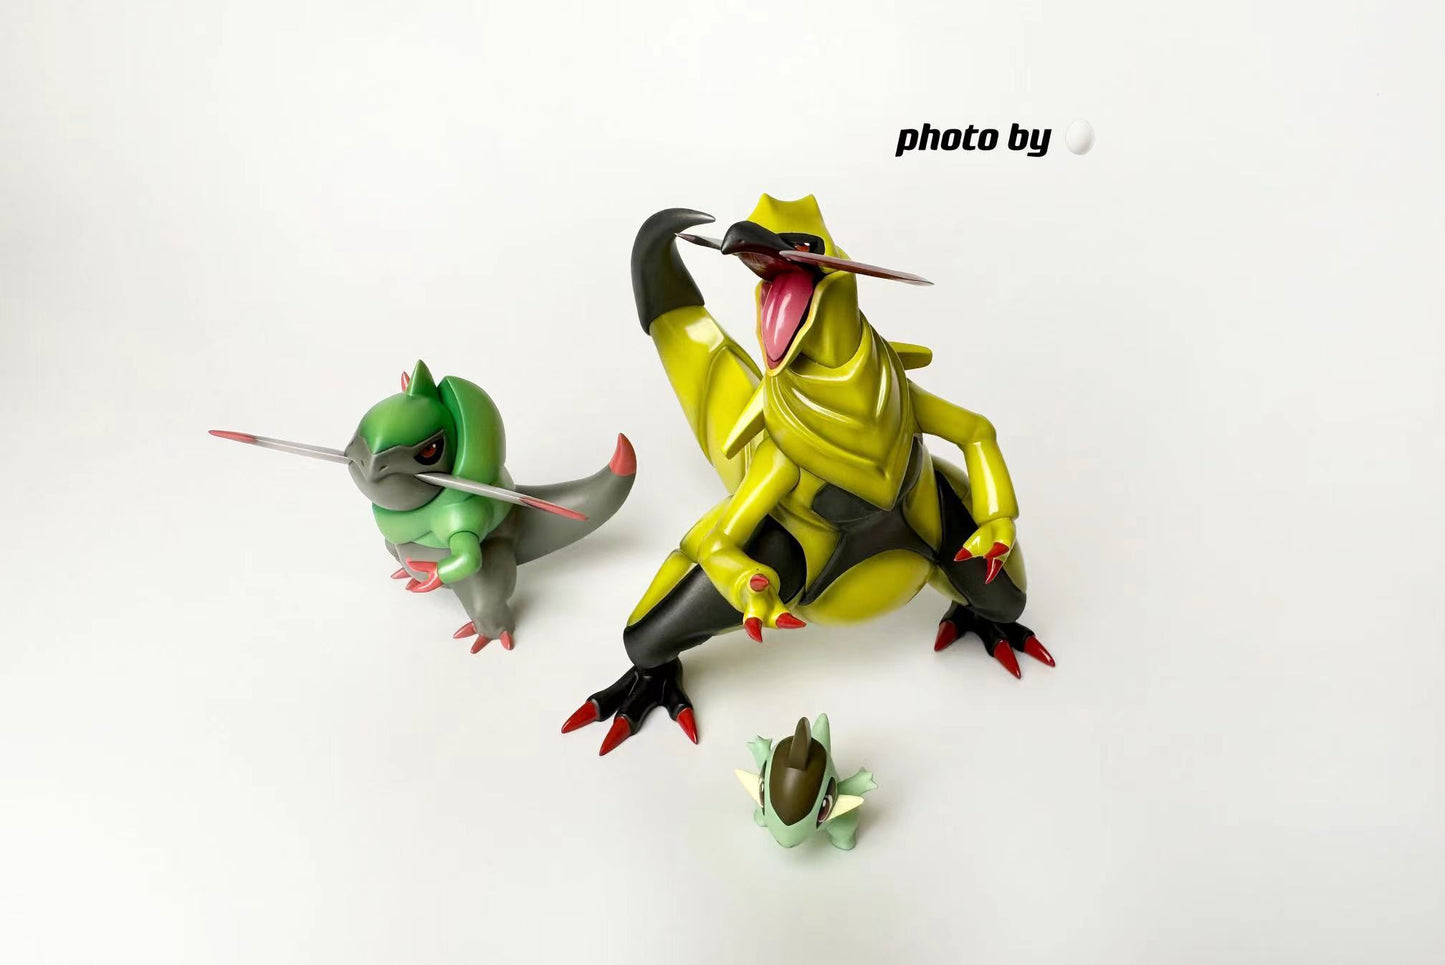 〖In Stock〗Pokemon Scale World Axew Fraxure Haxorus #610 #611 #612 1:20 - Trainer House Studio